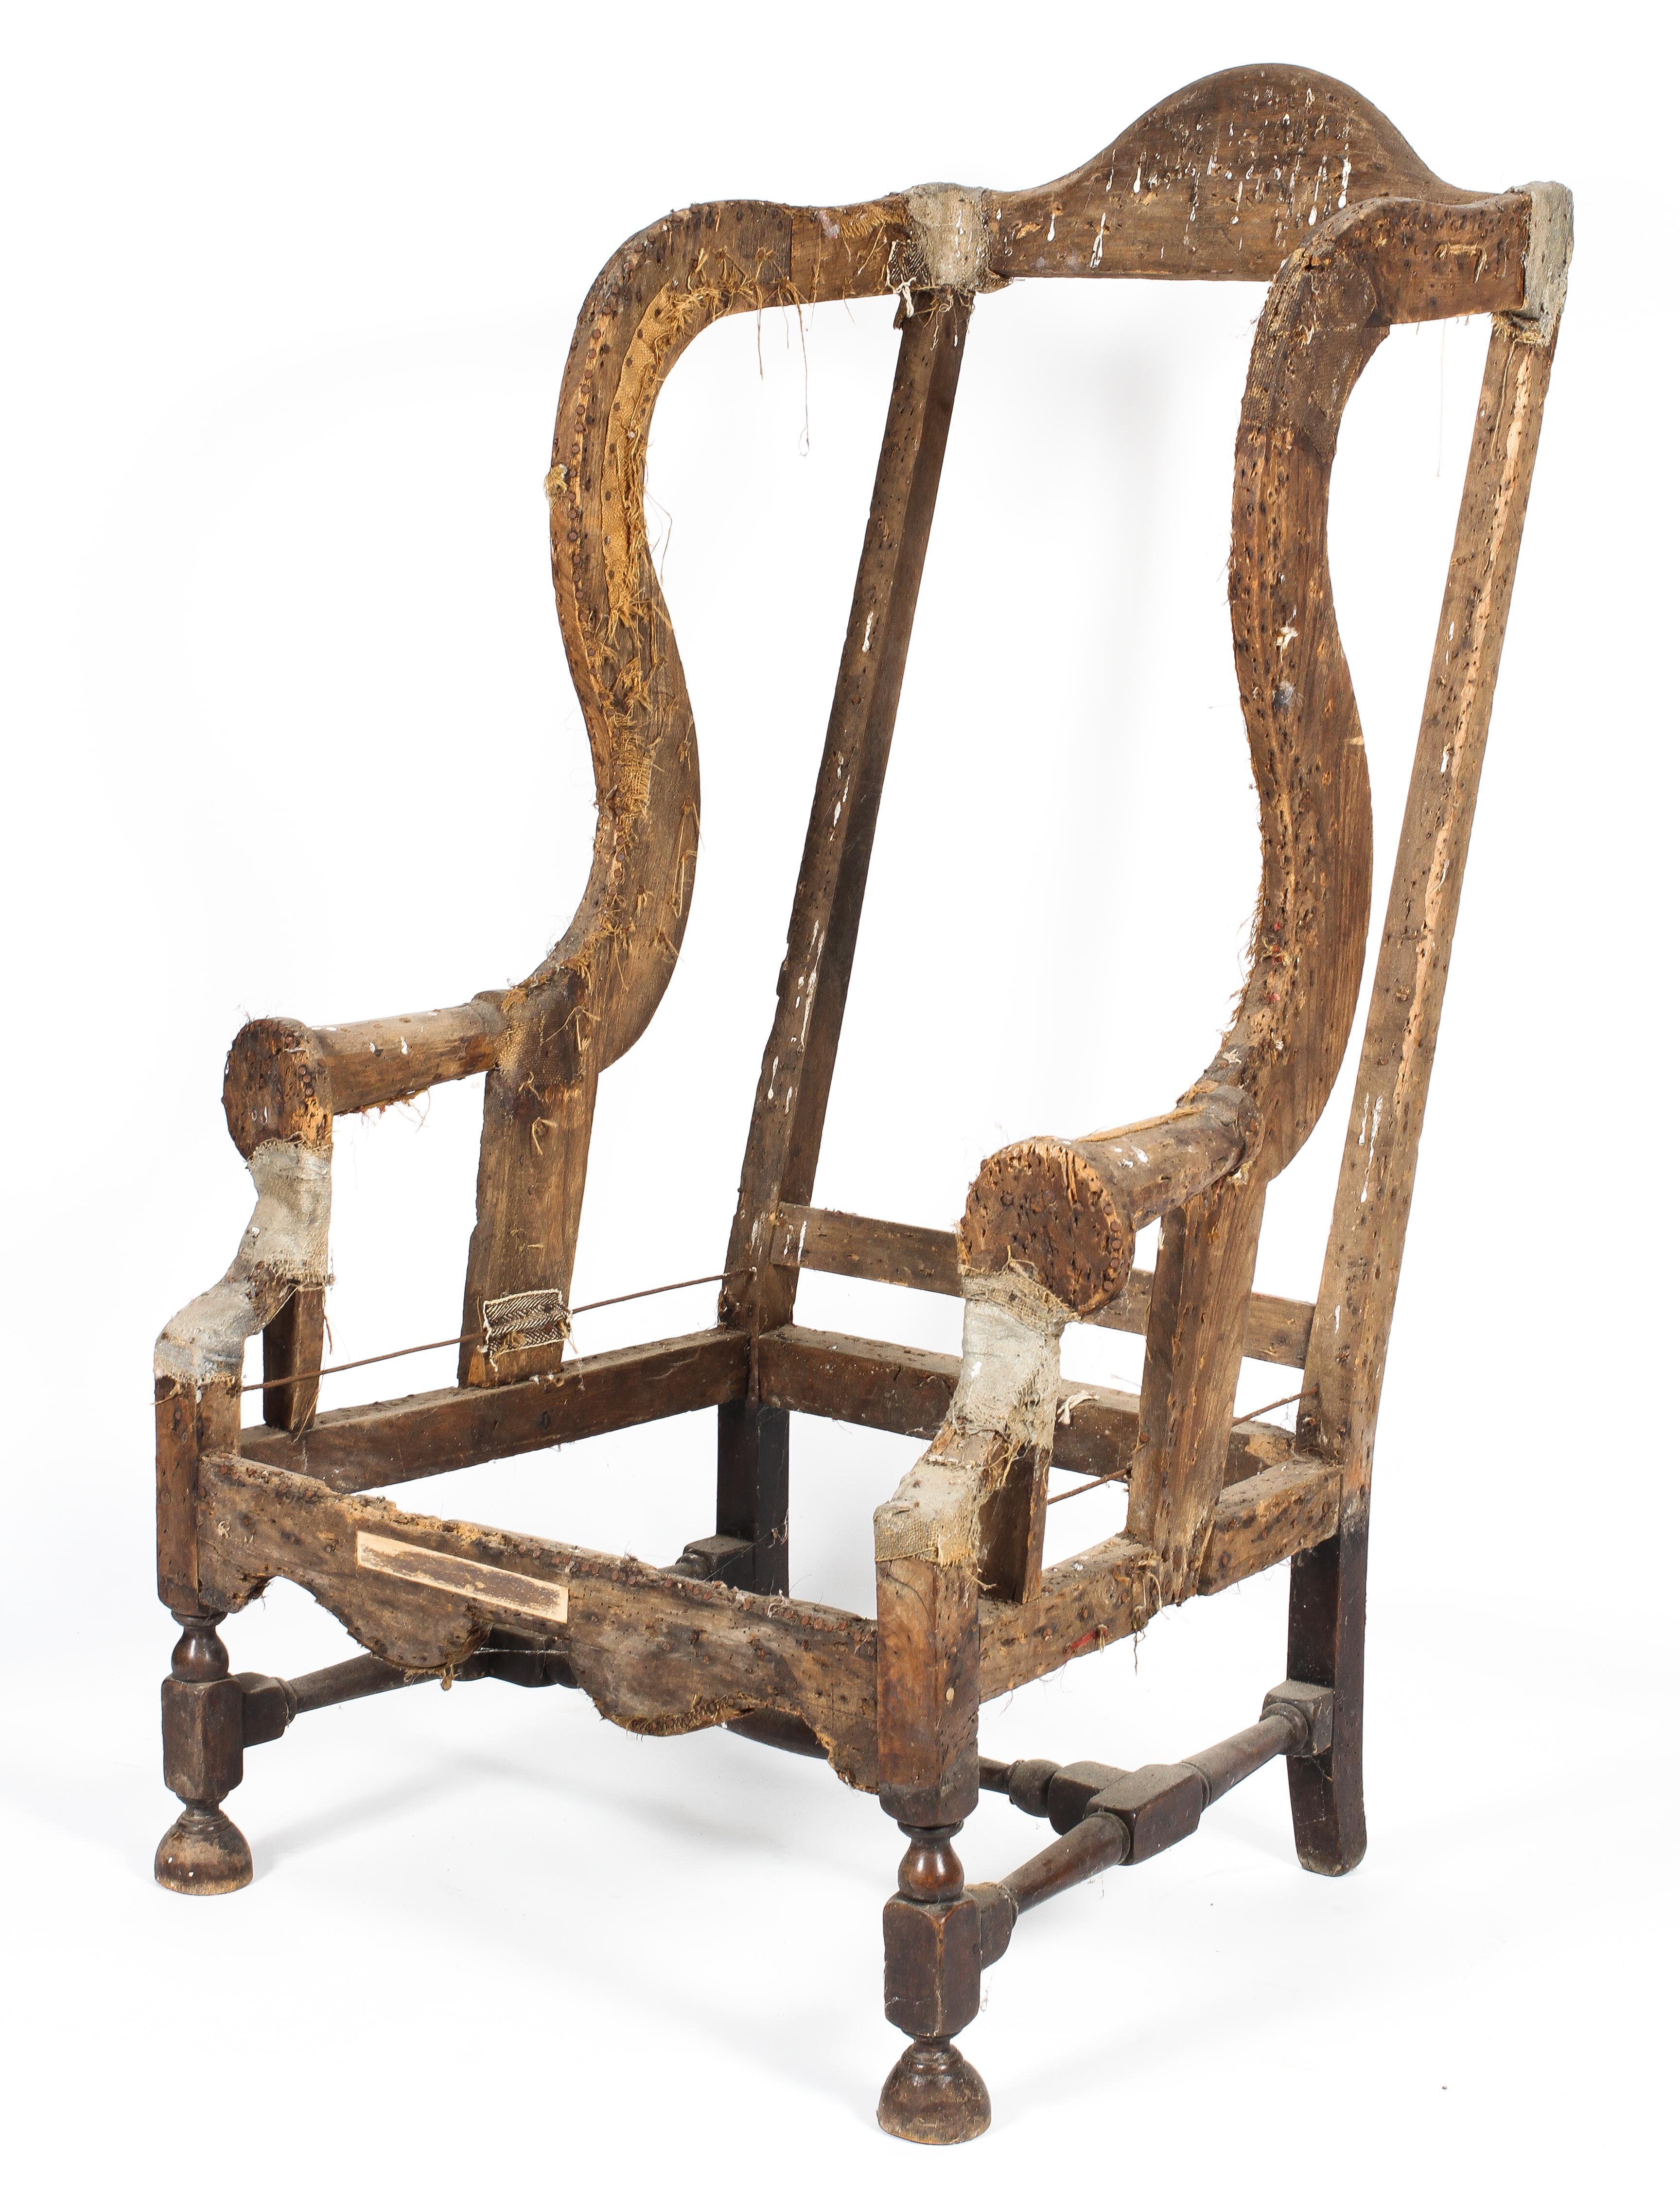 A Queen Anne armchair frame, late 17th/early 18th century,